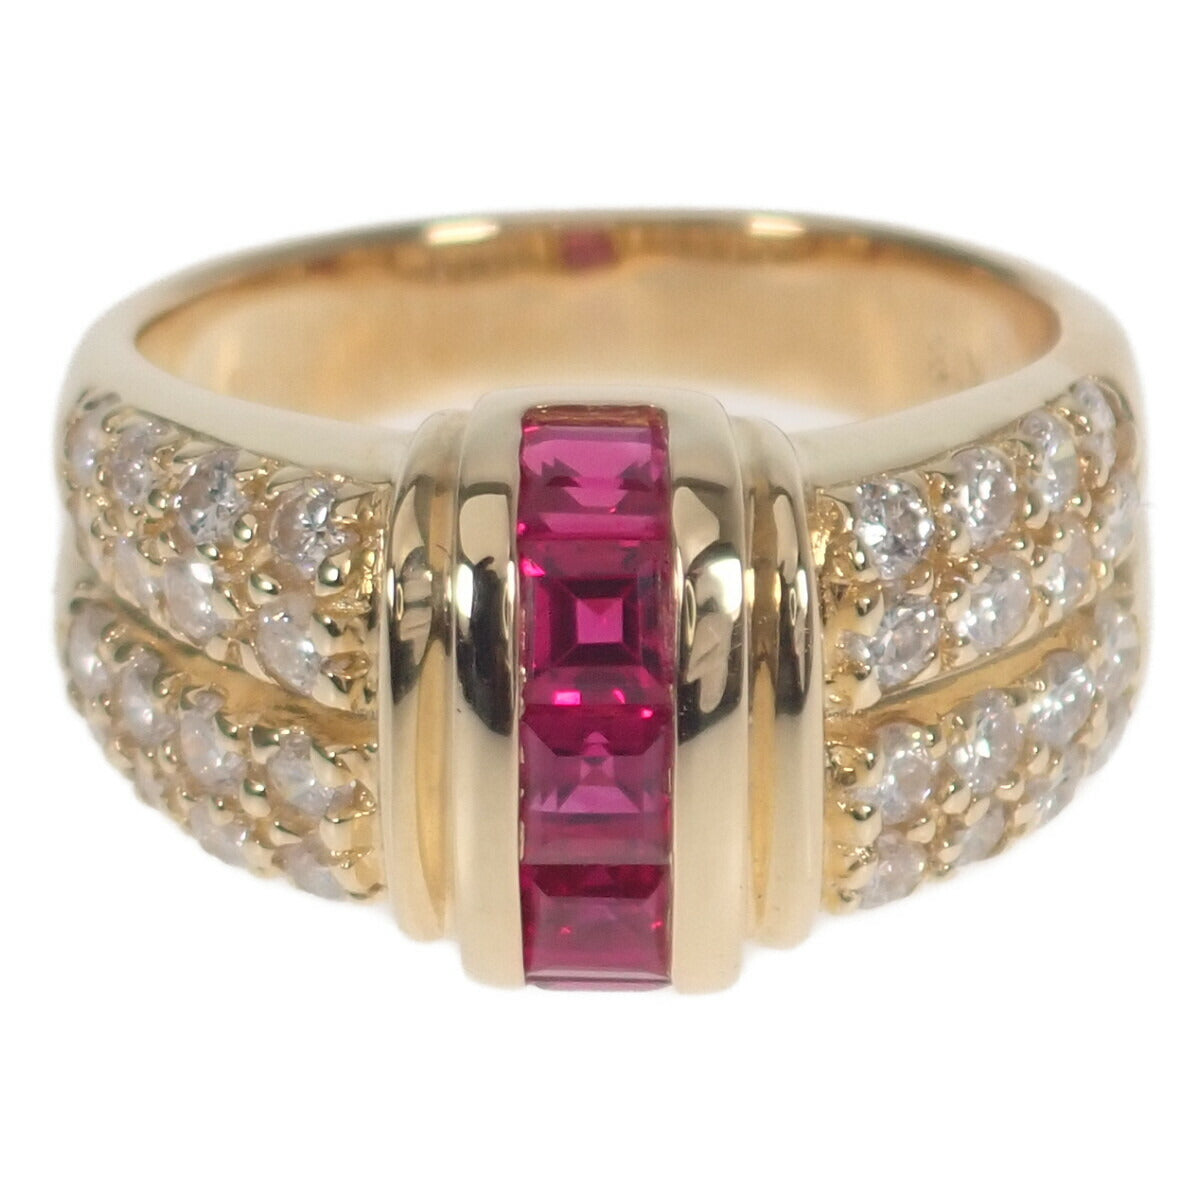 K18 Yellow Gold Ruby Diamond Ring with 1.11ct Ruby and 0.85ct Diamond for Women